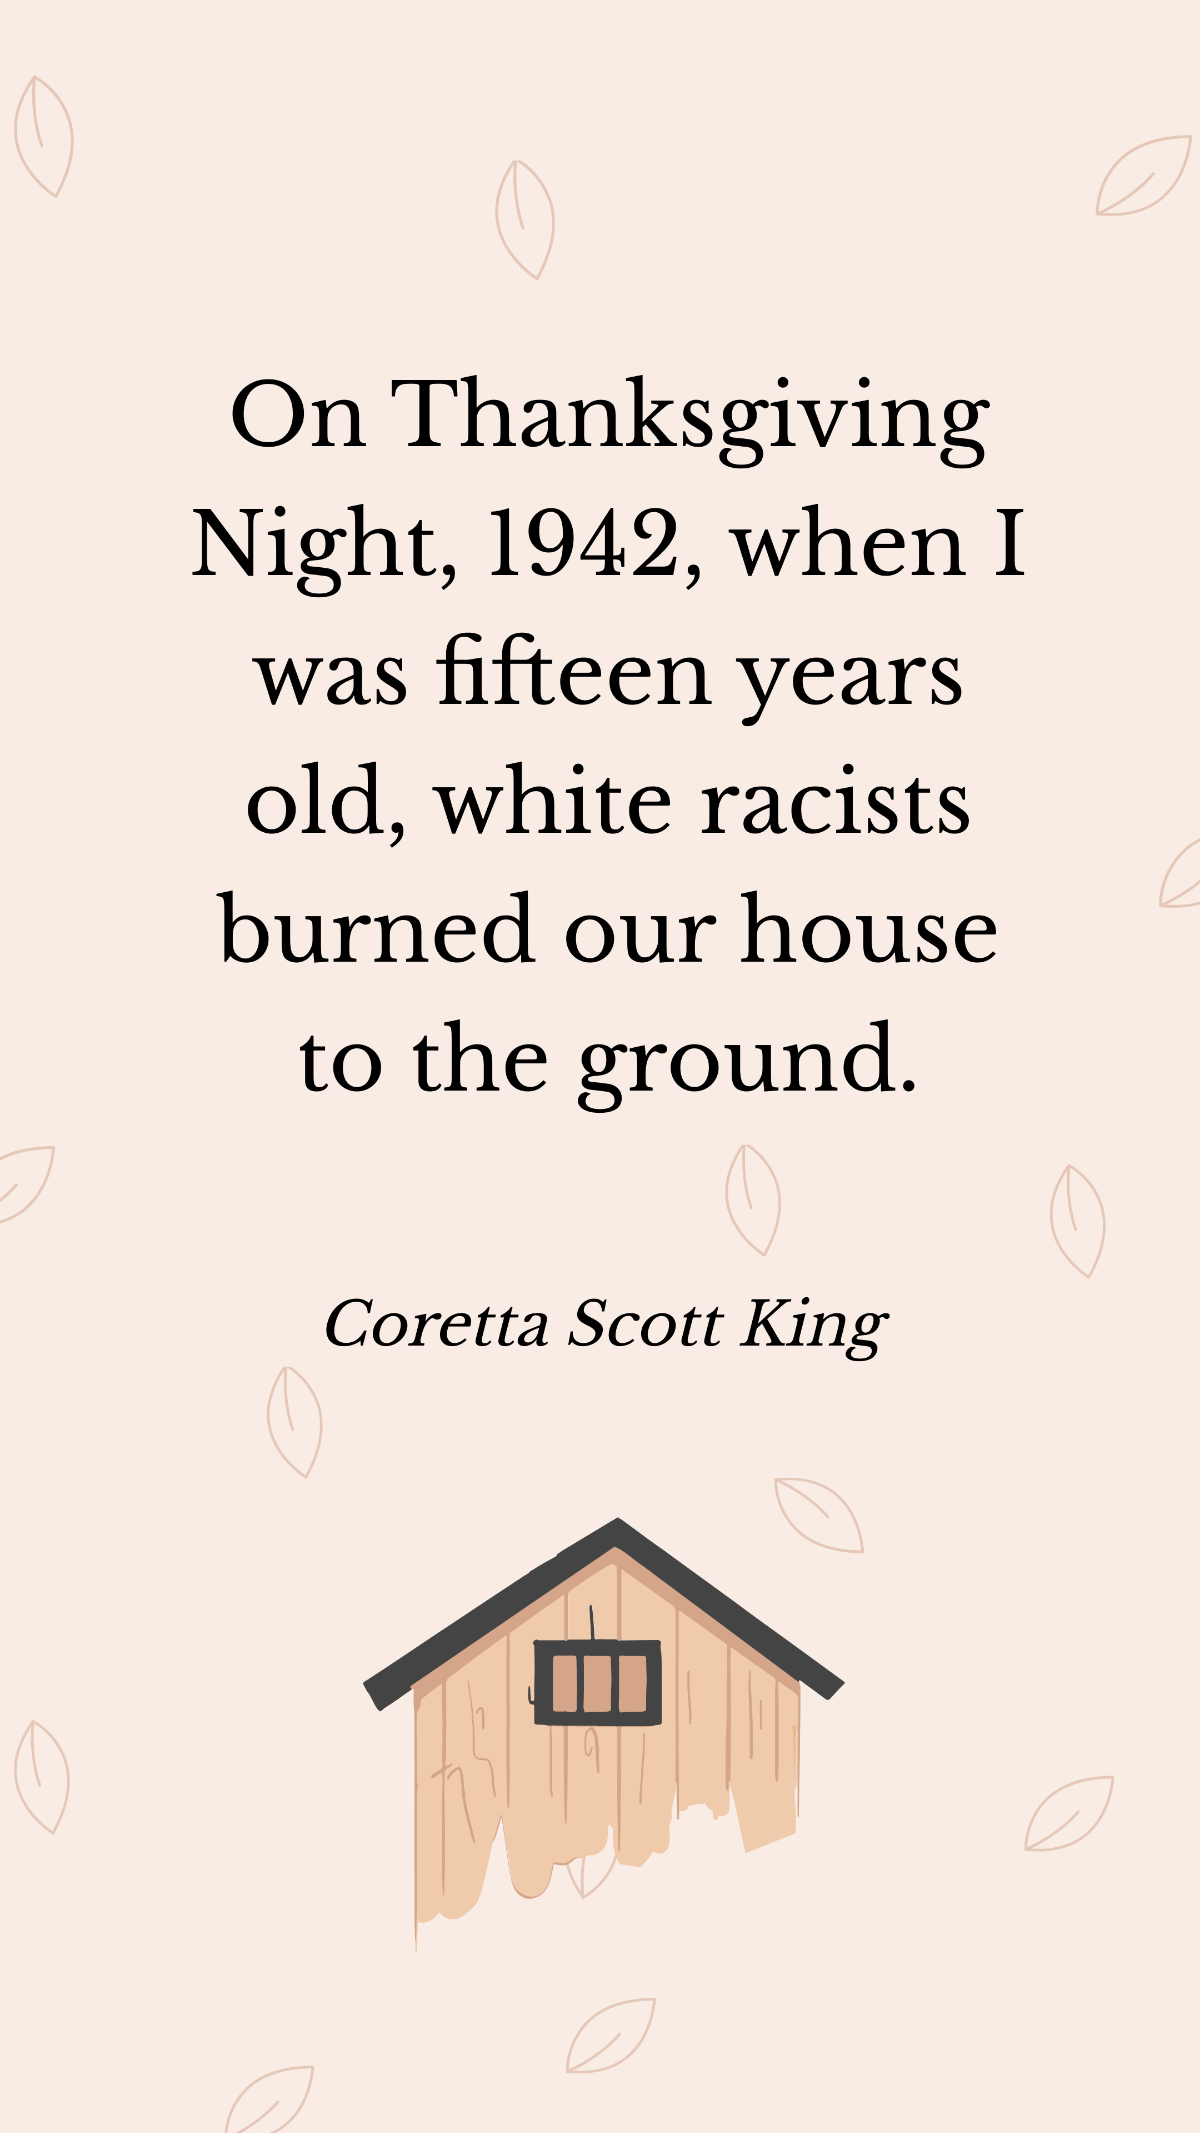 Coretta Scott King - On Thanksgiving Night, 1942, when I was fifteen years old, white racists burned our house to the ground. Template